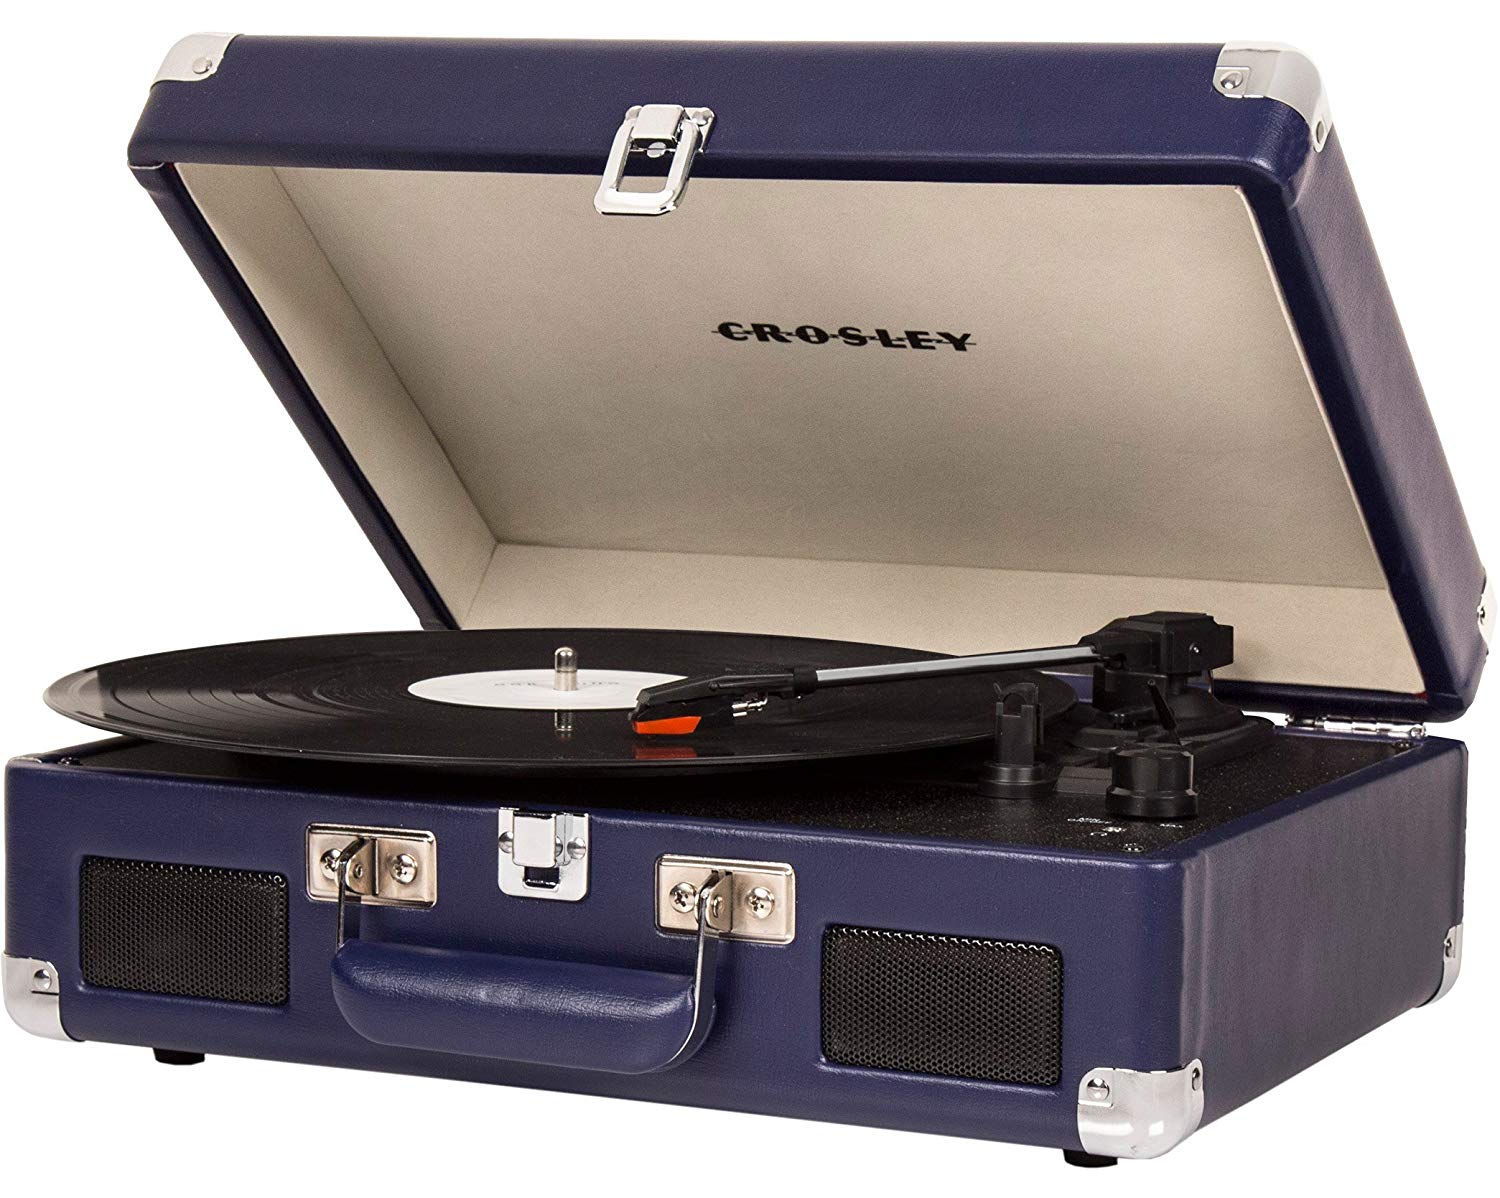 1byone Belt-Drive 3-Speed Stereo Turntable with Built in Speakers – Just $39.99!